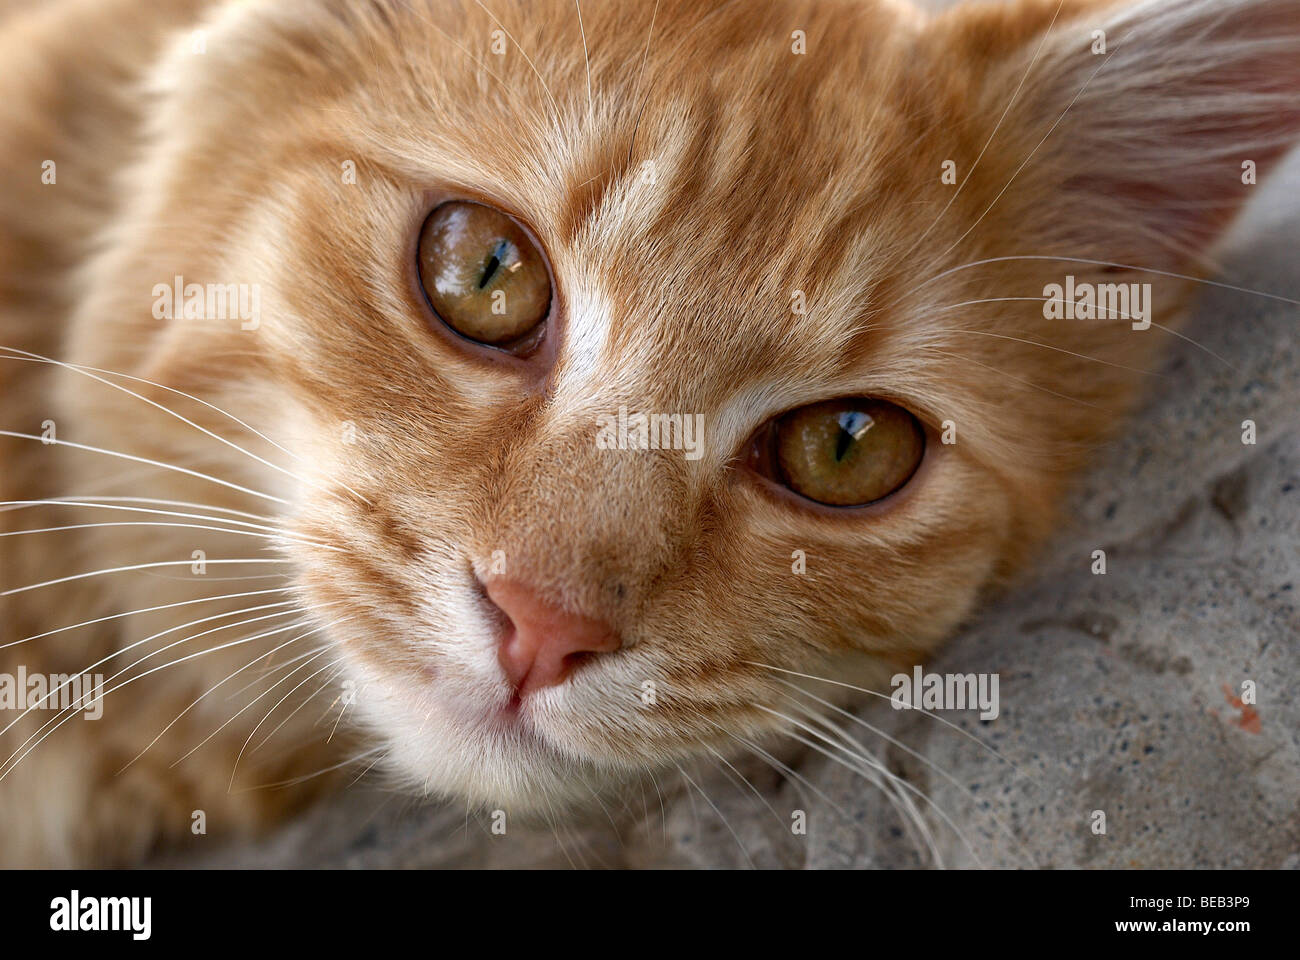 Ginger cat, cat, whiskers, yellow eyes, lion, lions head, lion pose, pink nose, ginger, regal cat, cats eyes, cat eyes, close-up Stock Photo